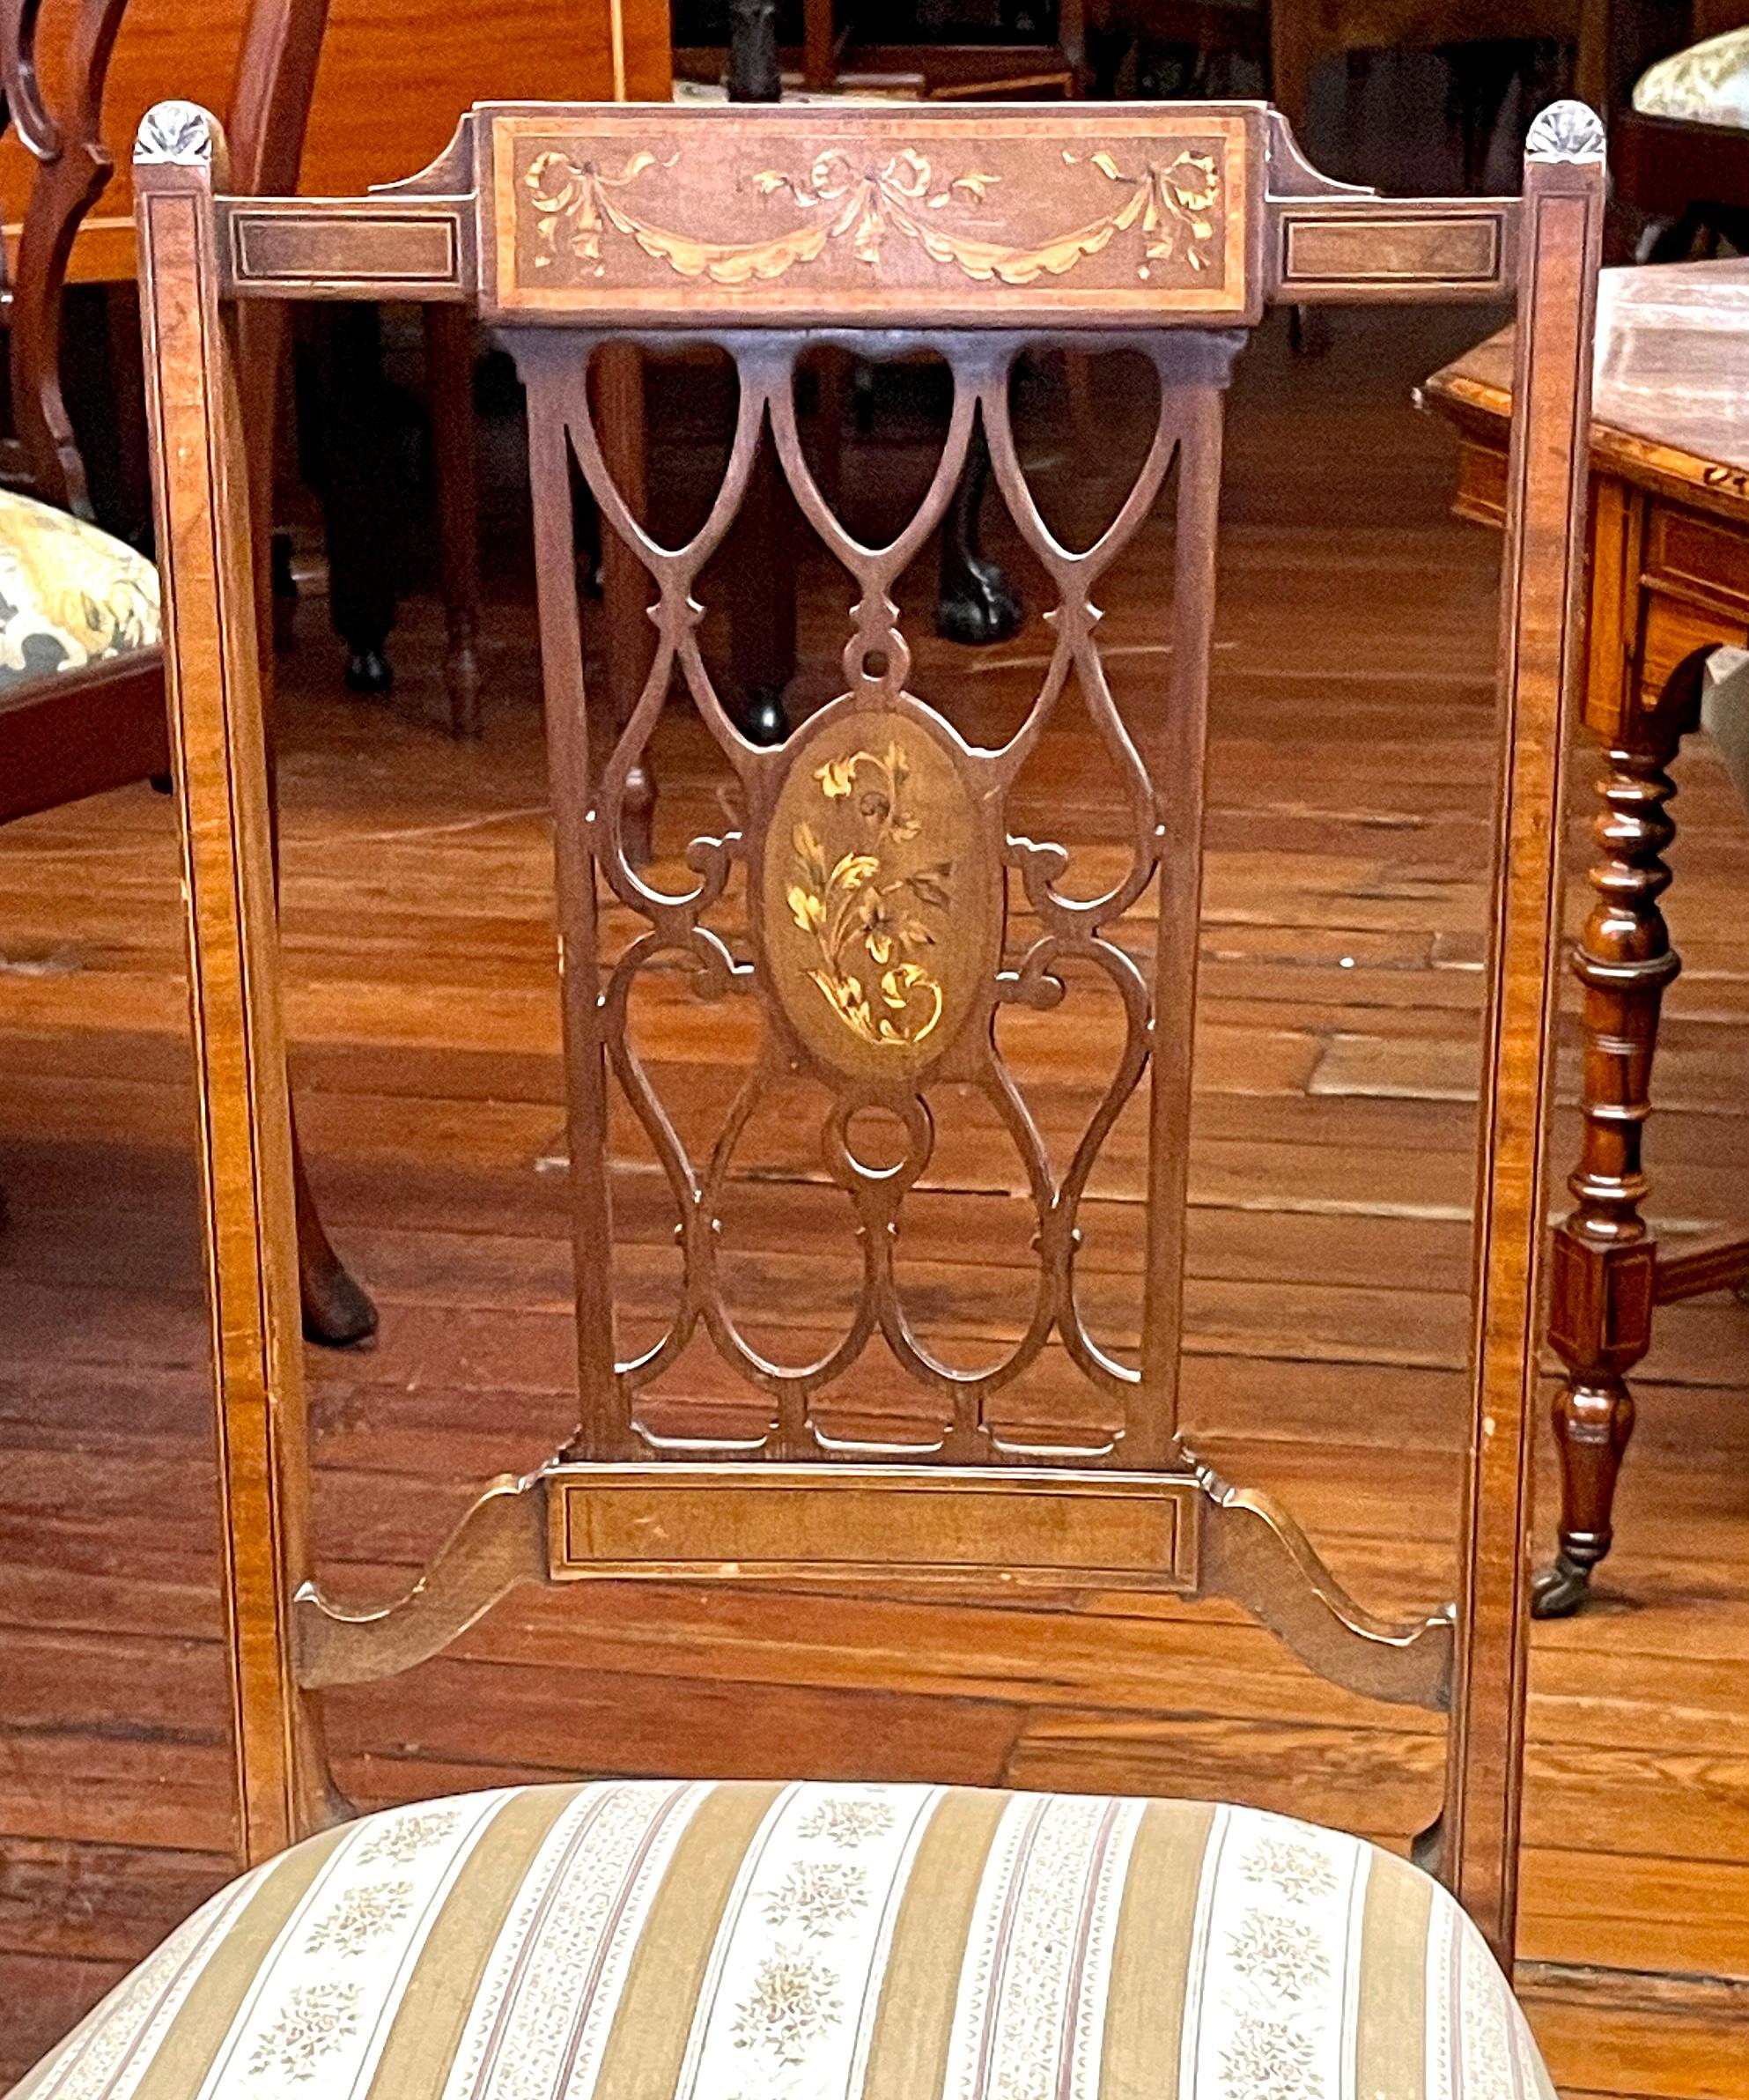 Set of 4 Antique English Edwardian marquetry inlaid Mahog. Sheraton style chairs For Sale 9